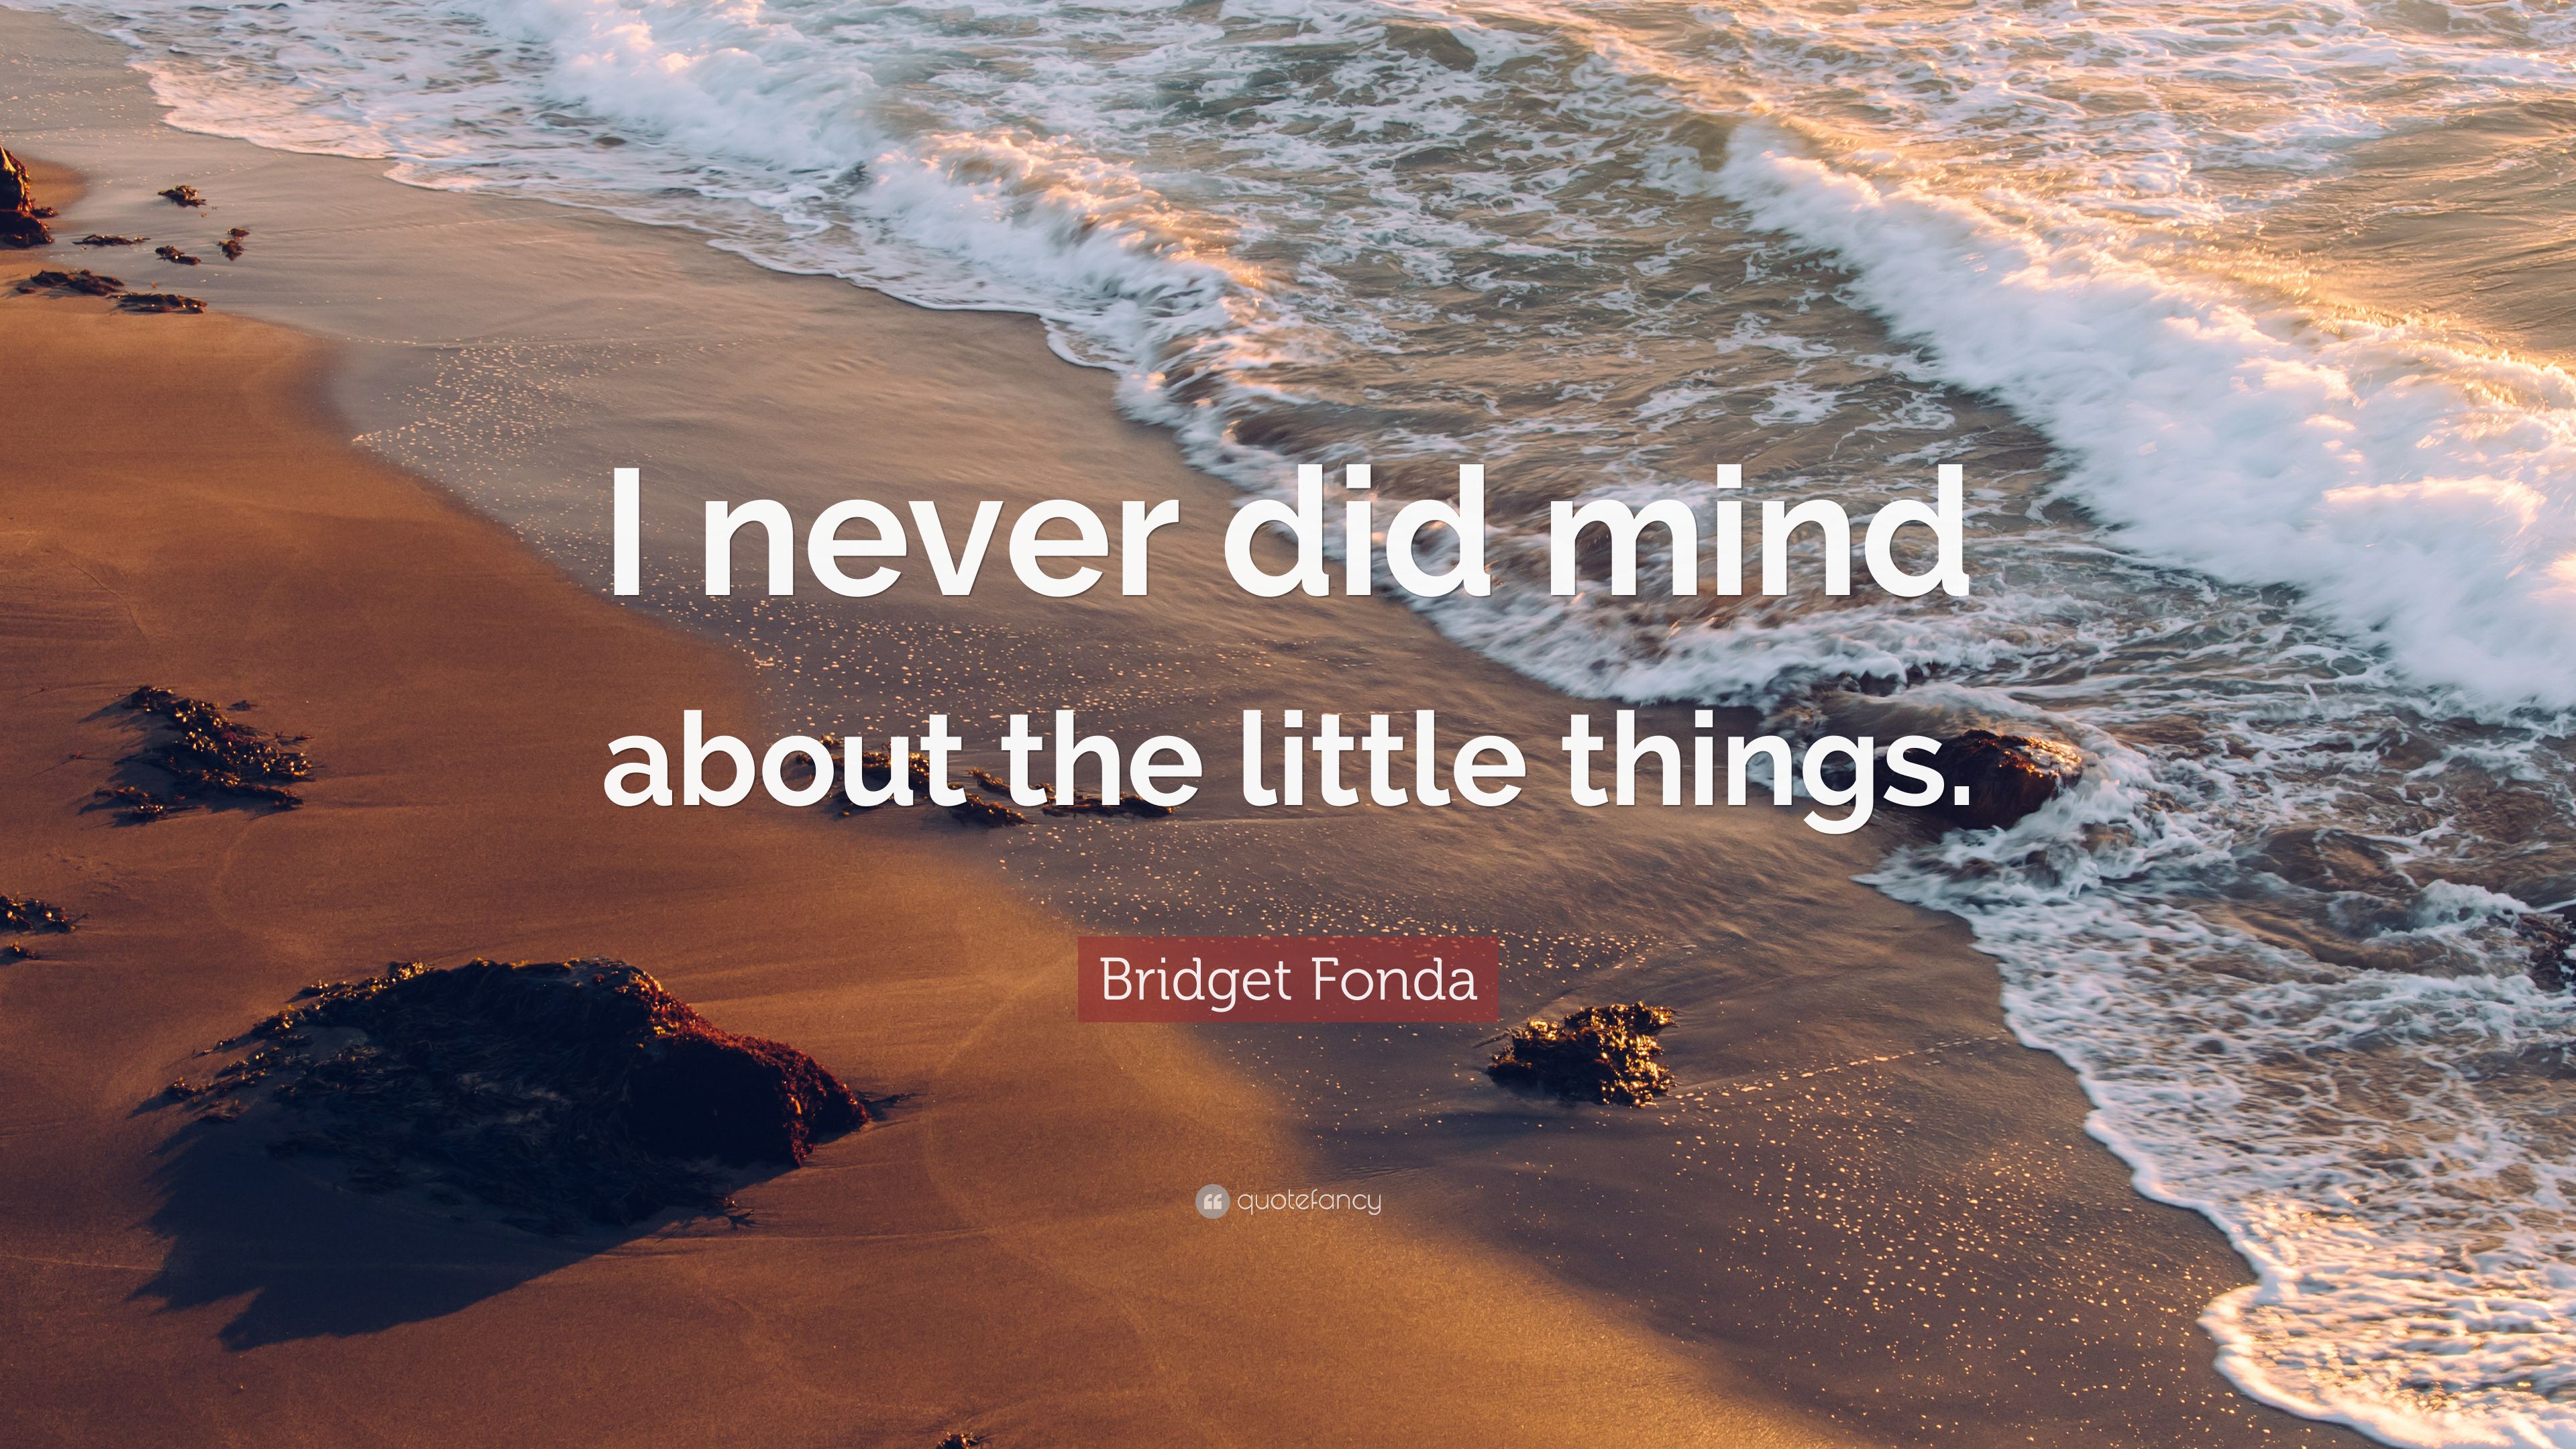 Bridget Fonda Quote: “I never did mind about the little things.” (9 wallpaper)